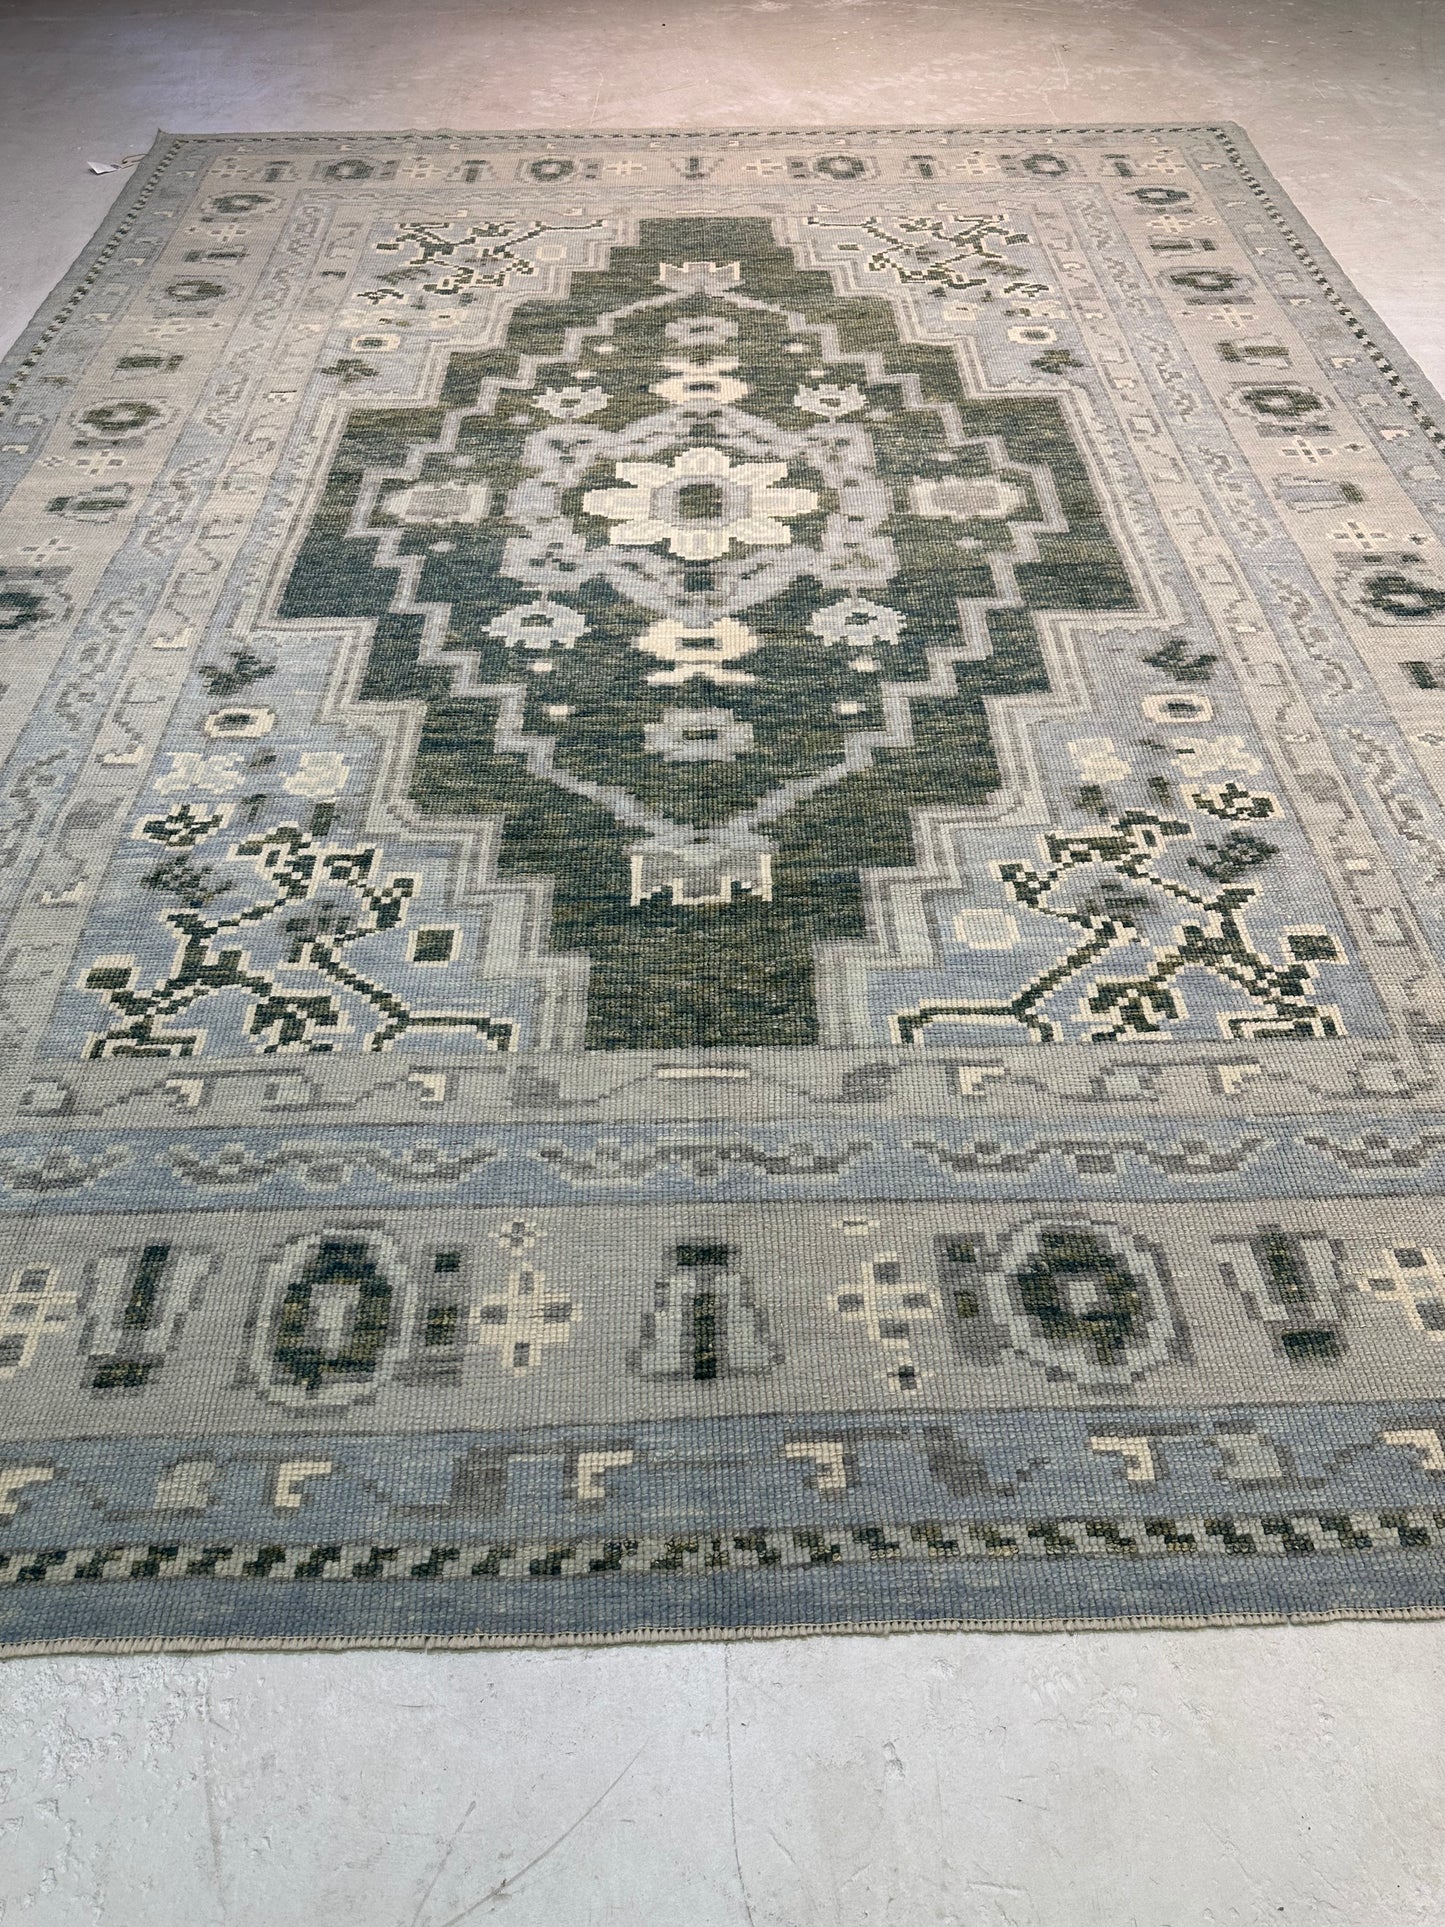 Hand-Knotted Wool Rug Turkish Oushak 9'3" x 12'2"